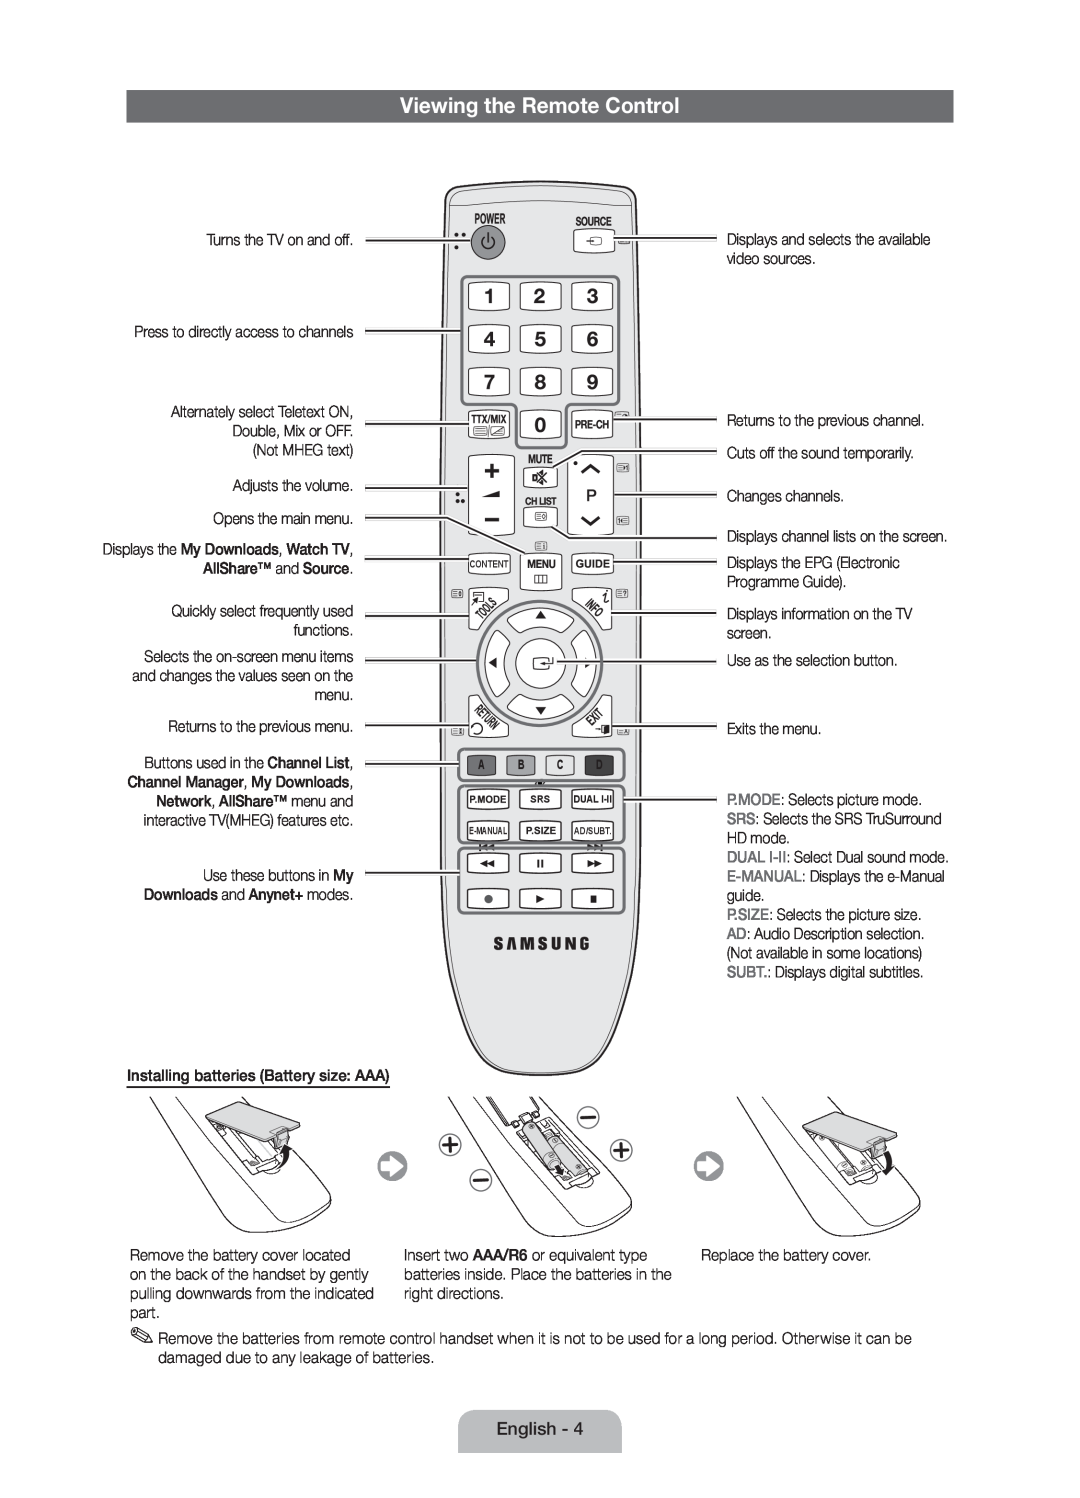 Samsung Series 5 user manual Viewing the Remote Control, Programme Guide 